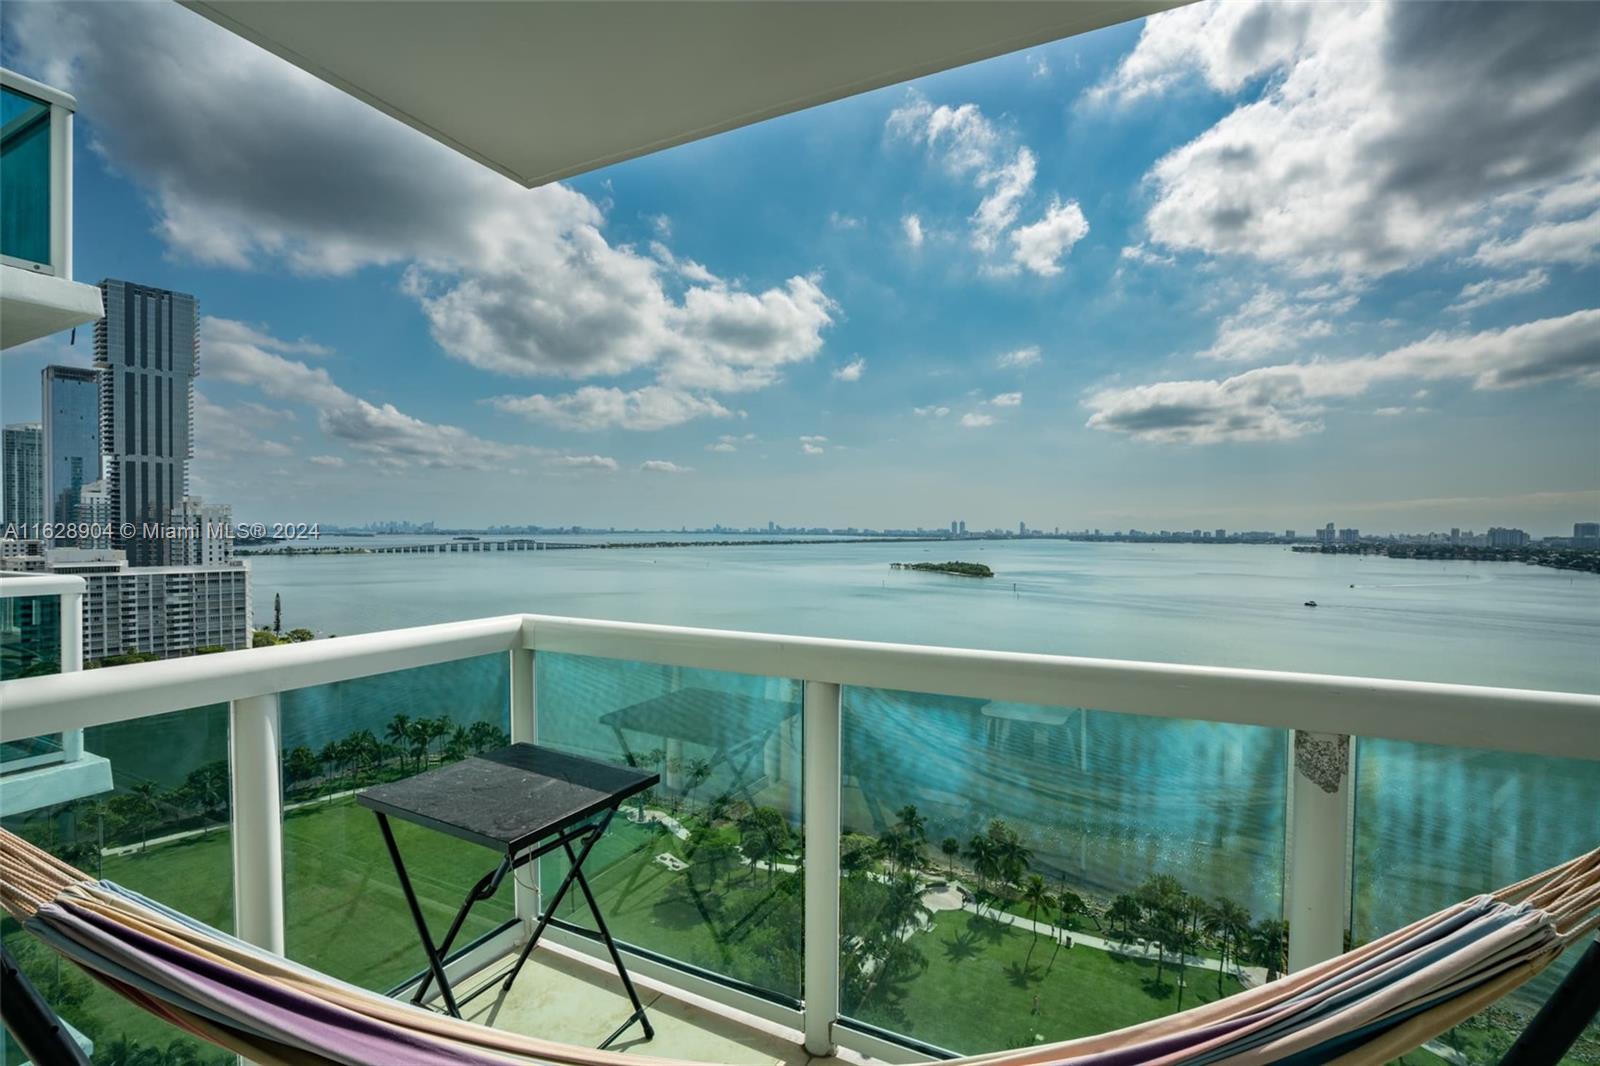 Gorgeous 2 Bedrooms / 2 Bathrooms split floor plan with AMAZING direct east facing unit overlooking Biscayne
Bay and Miami Beach. Located directly across from Margaret Pace Park in Edgewater . Rent includes; CABLE,
INTERNET, WATER and 1 ASSIGNED PARKING SPACE. Walking distance to Downtown Miami, Wynwood, Midtown
and Design District.